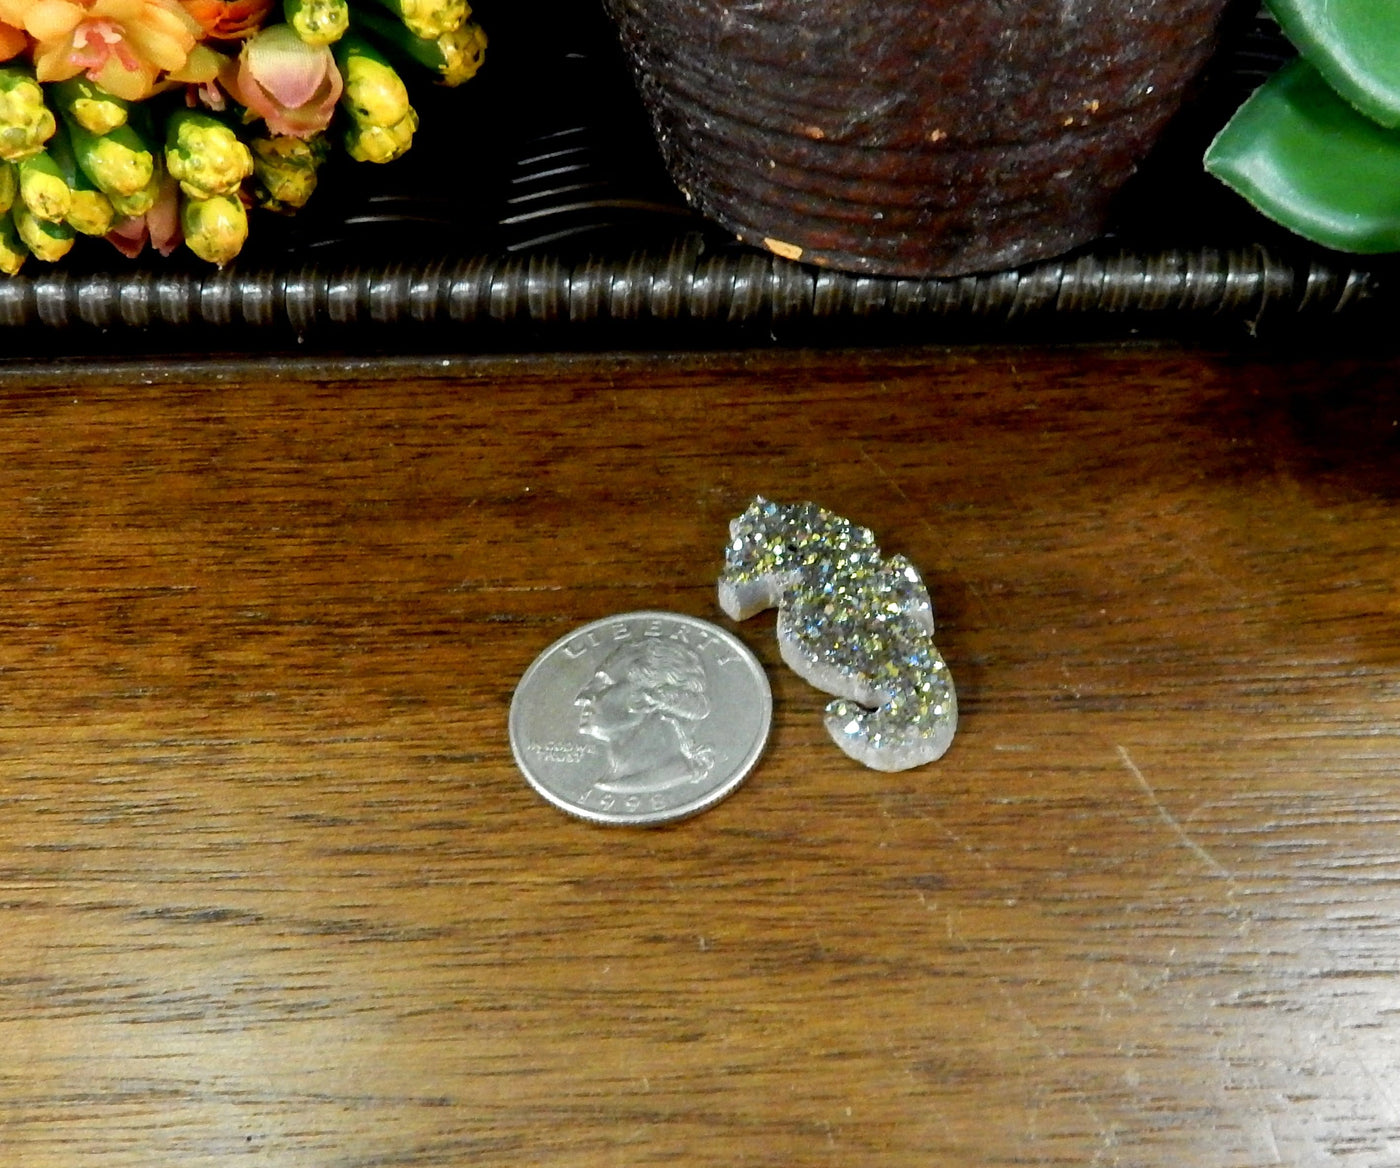 1 Rainbow Titanium Treated Druzy Seahorse next to a quarter for size comparison on wooden table